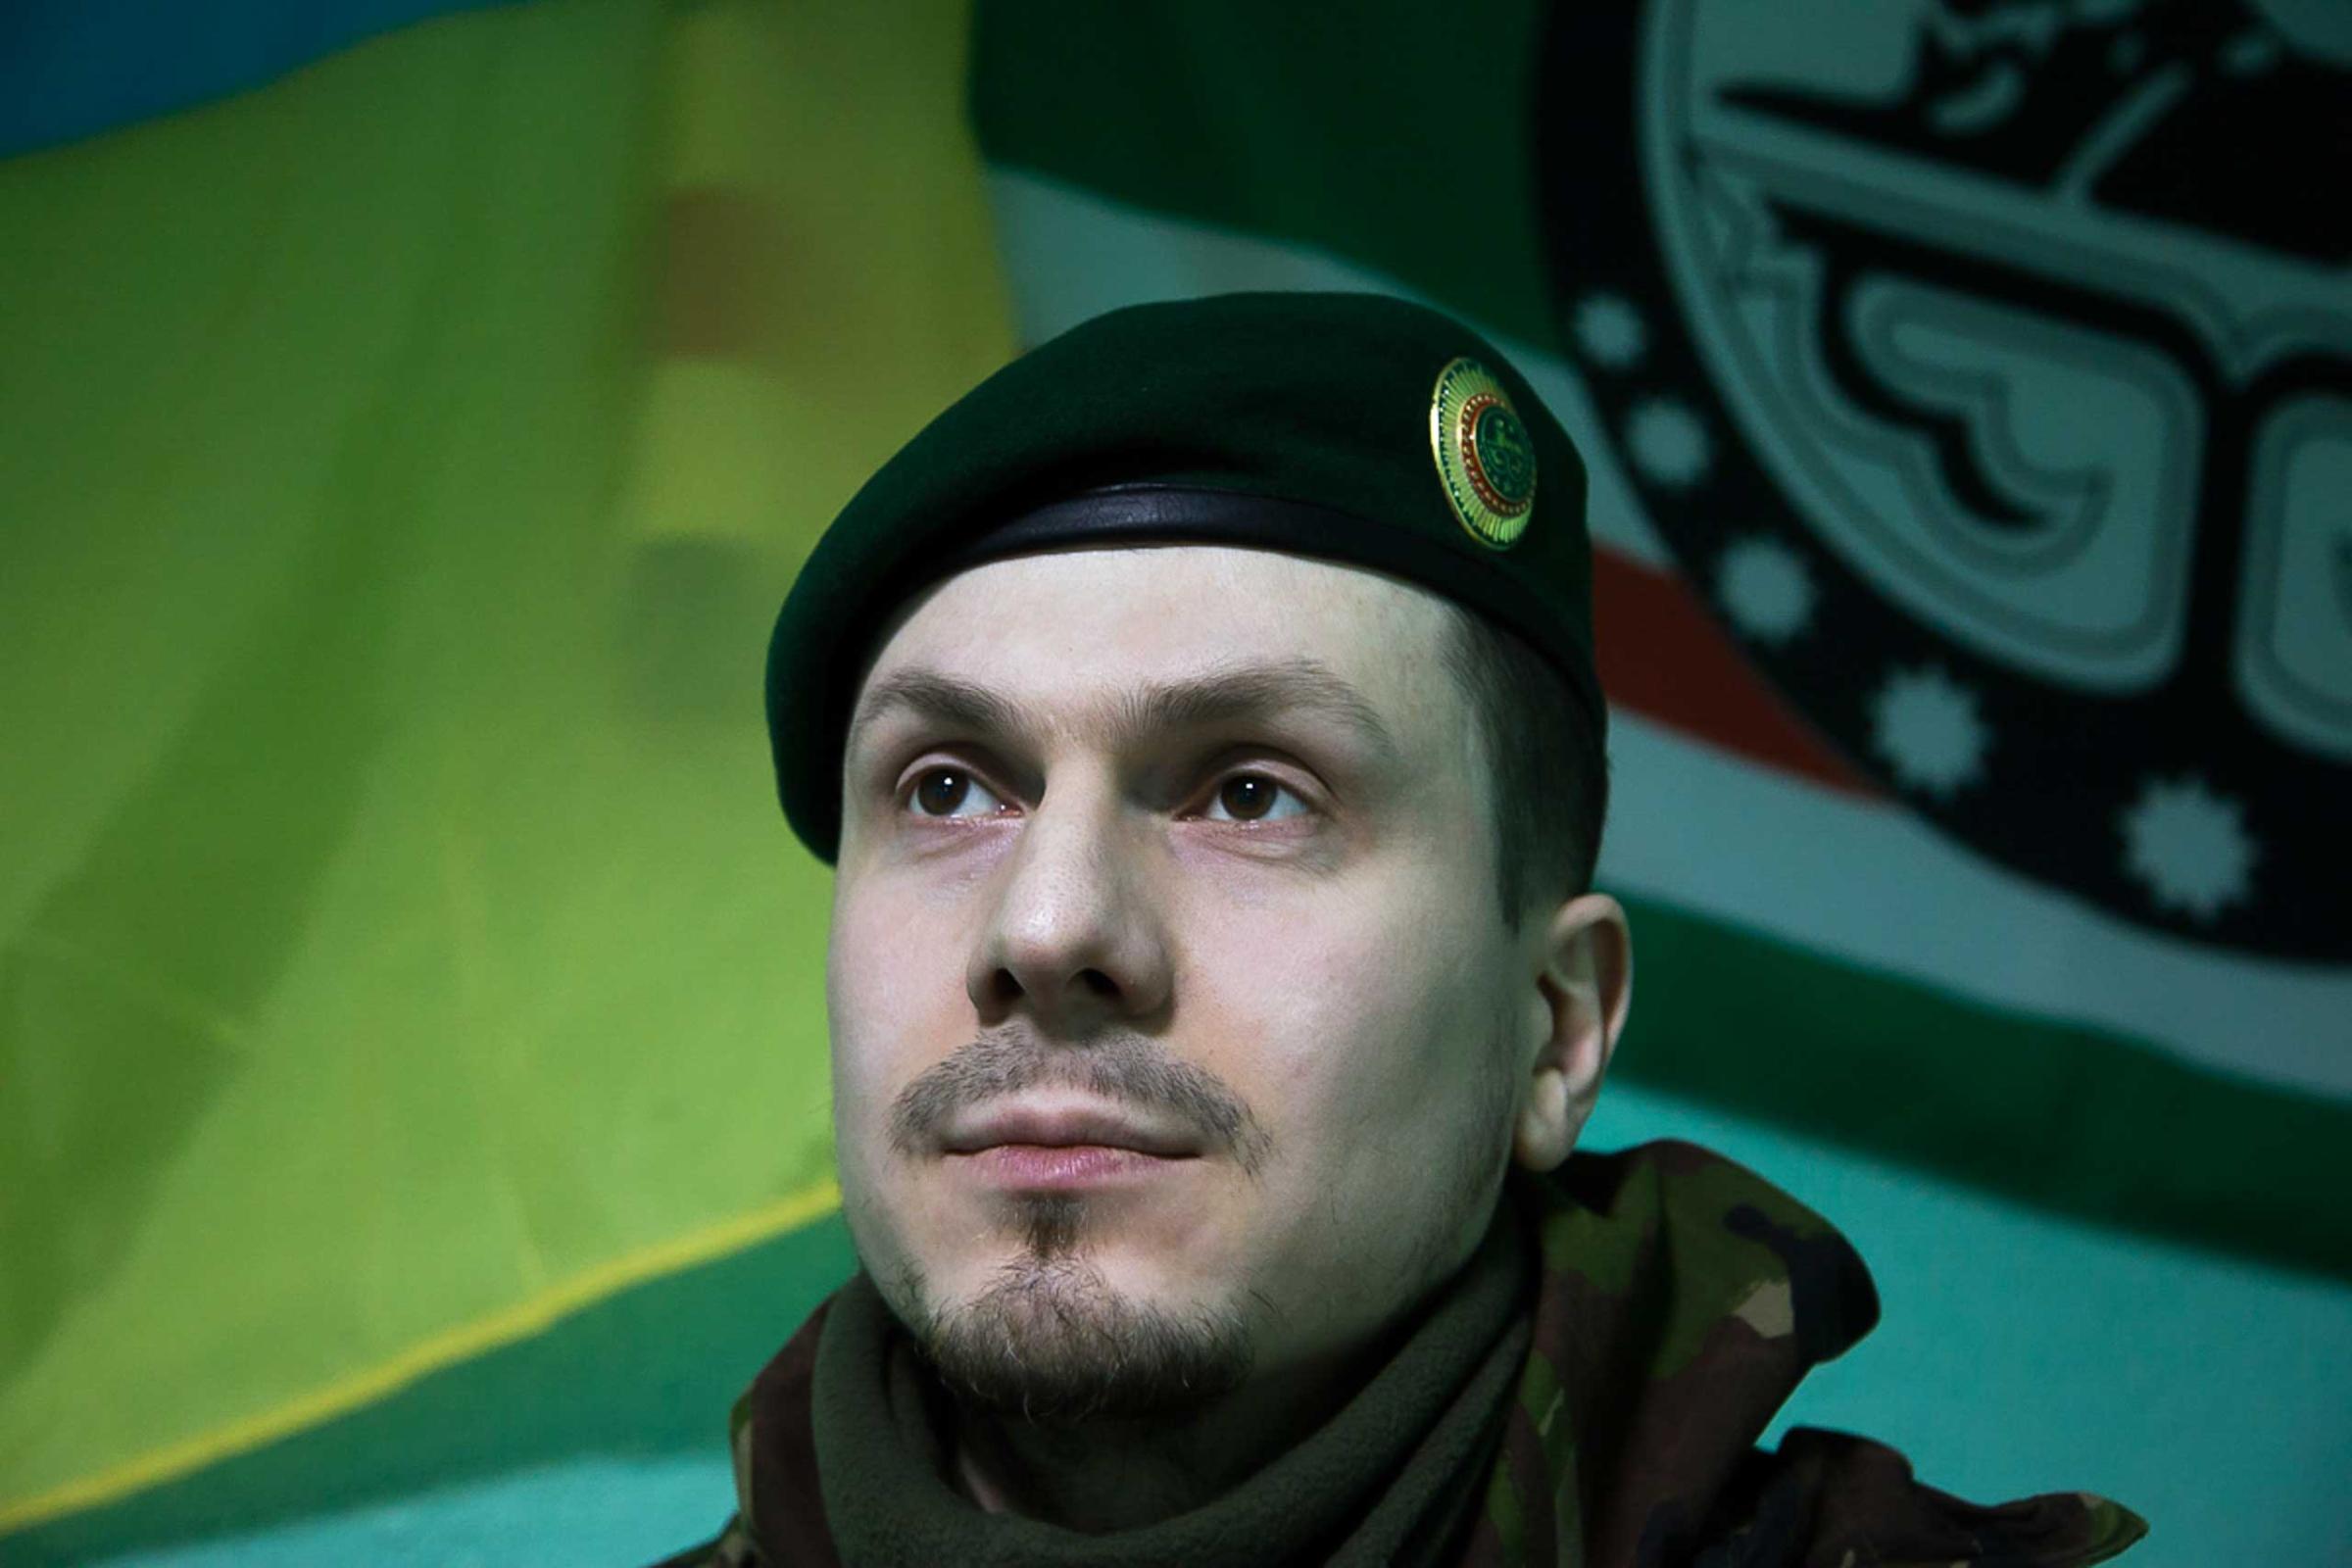 Adam Osmayev, the commander of a battalion of Chechens fighting against Russia-backed rebels, is in the town of Lysychansk, Ukraine on March 2, 2015.